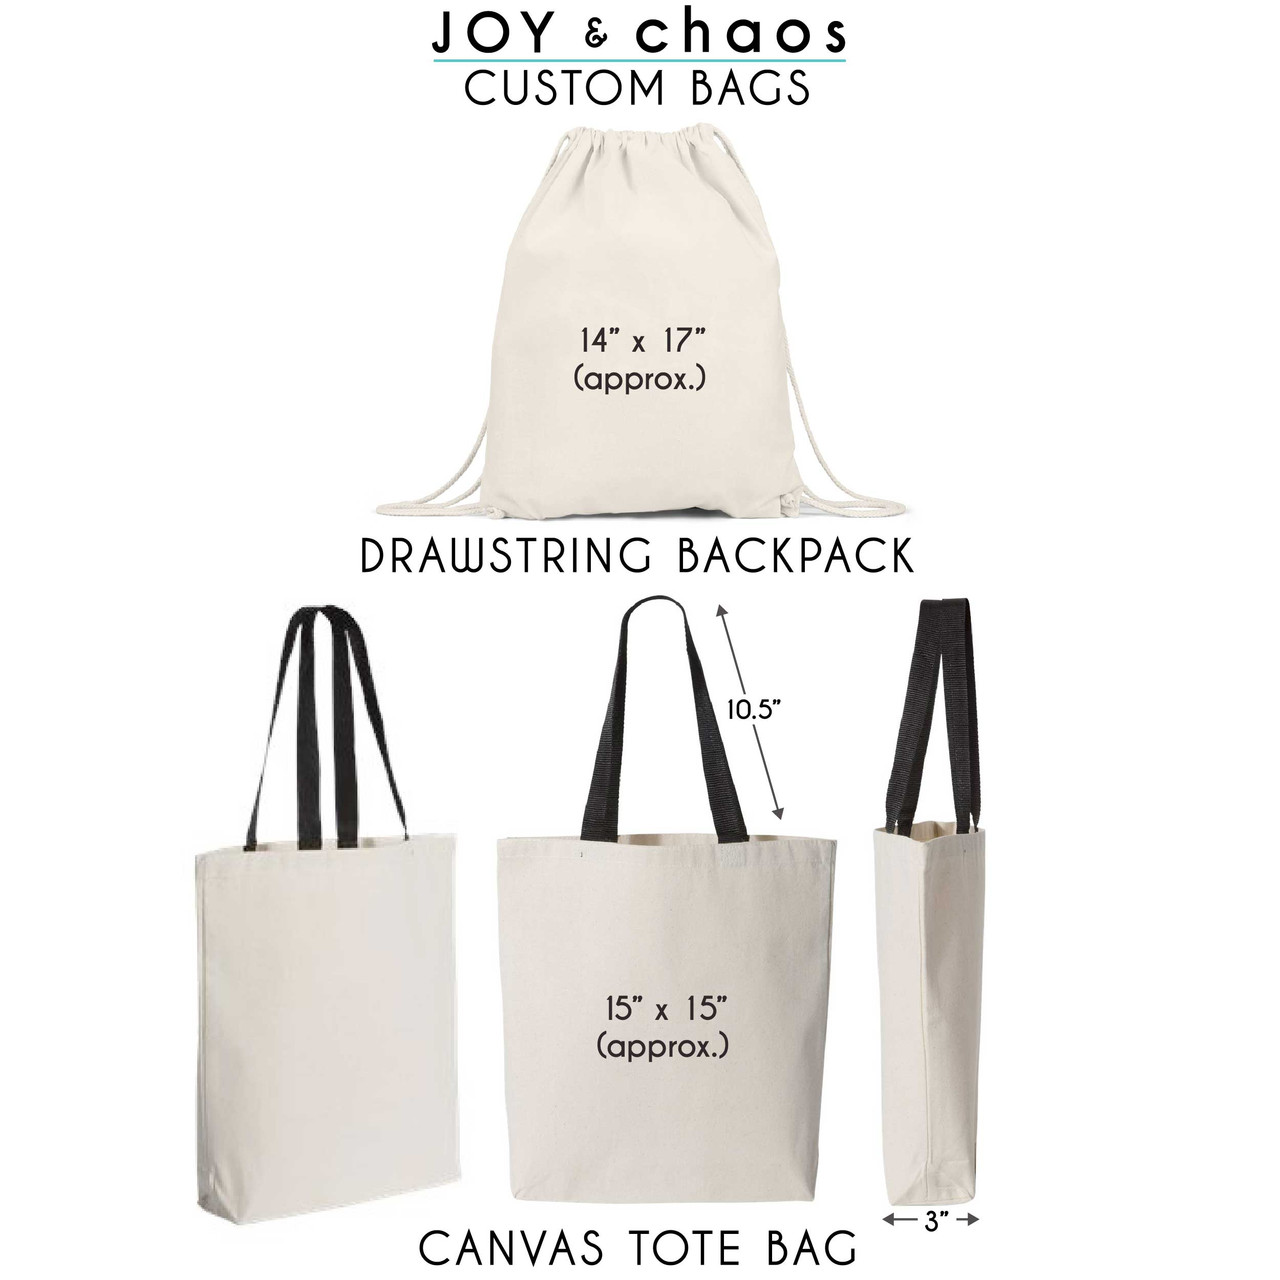 Personalised Tote Bag/ Any Name Natural Cotton Weekend Shopper 